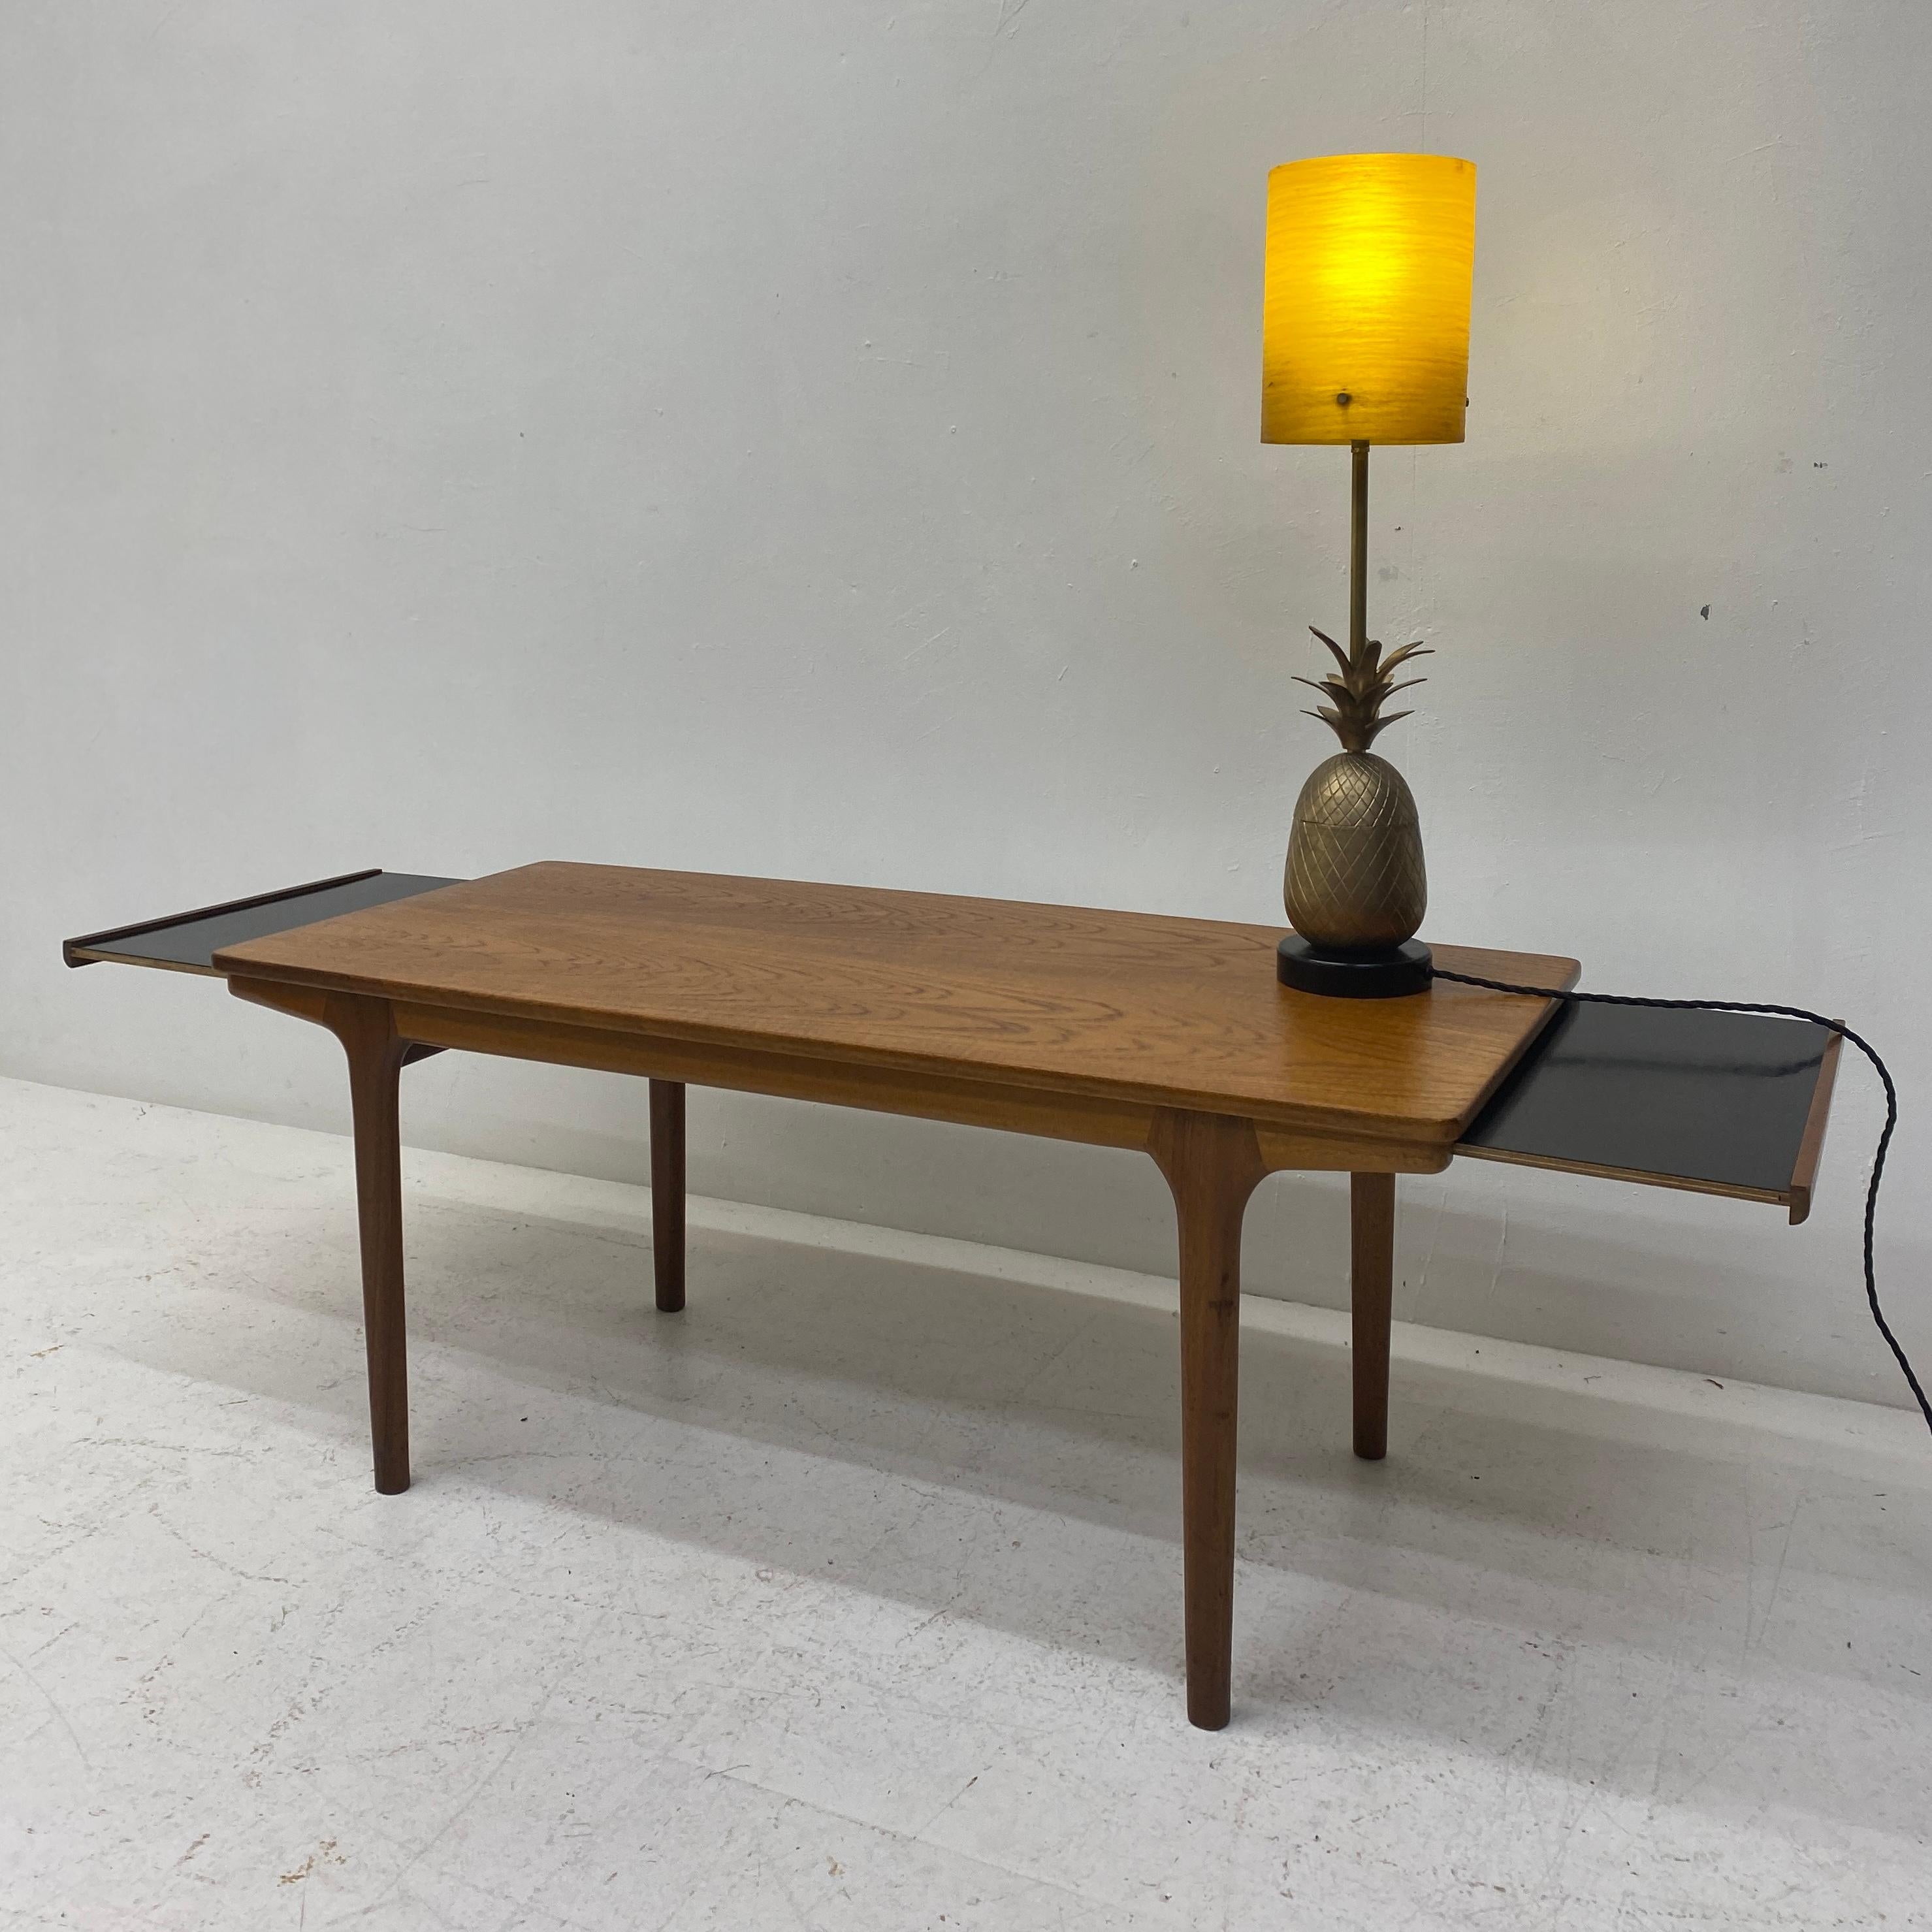 A very attractive midcentury coffee table by Scottish McIntosh & Co Ltd. Teak top, frame & legs & pullout extensions at either side in black melamine. Great leg detail. The coffee table is a very elegant rectangular shape & nice for a smaller